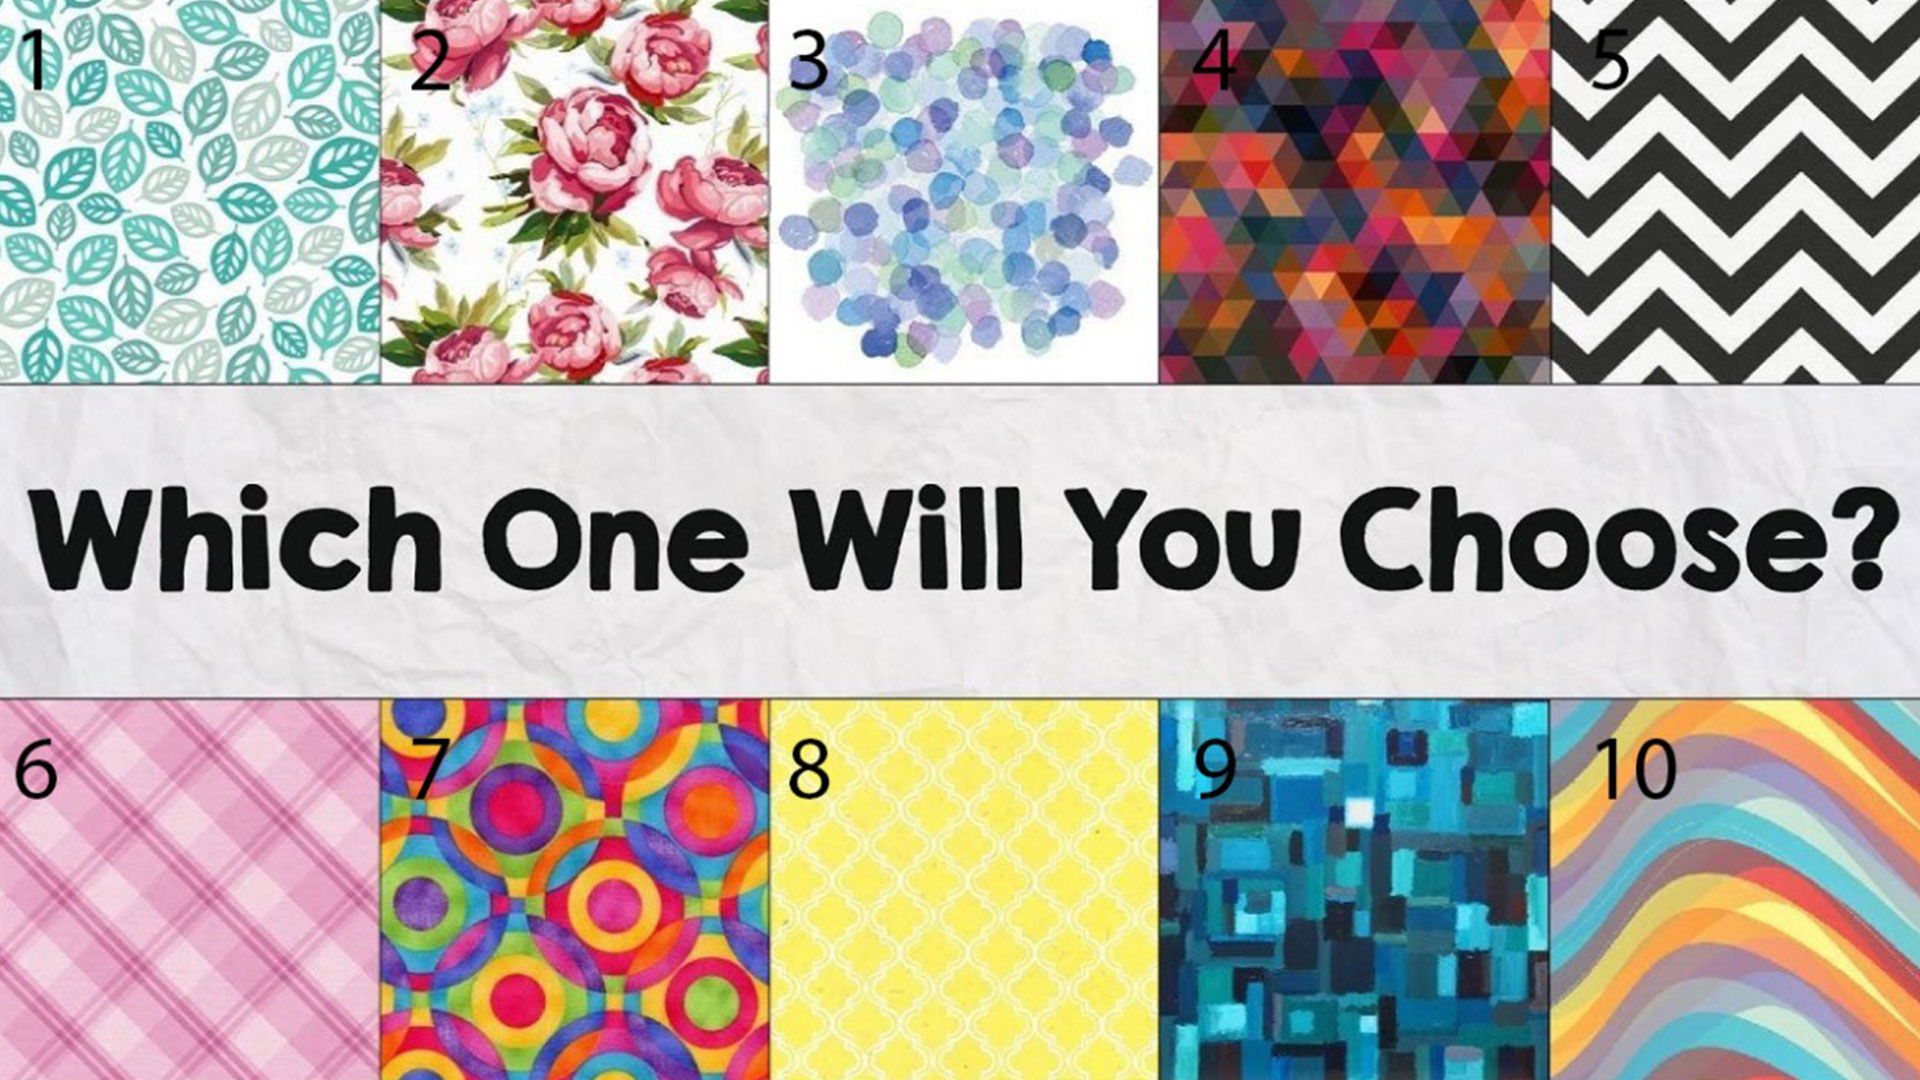 The first pattern you're drawn to reveals a lot about your personality